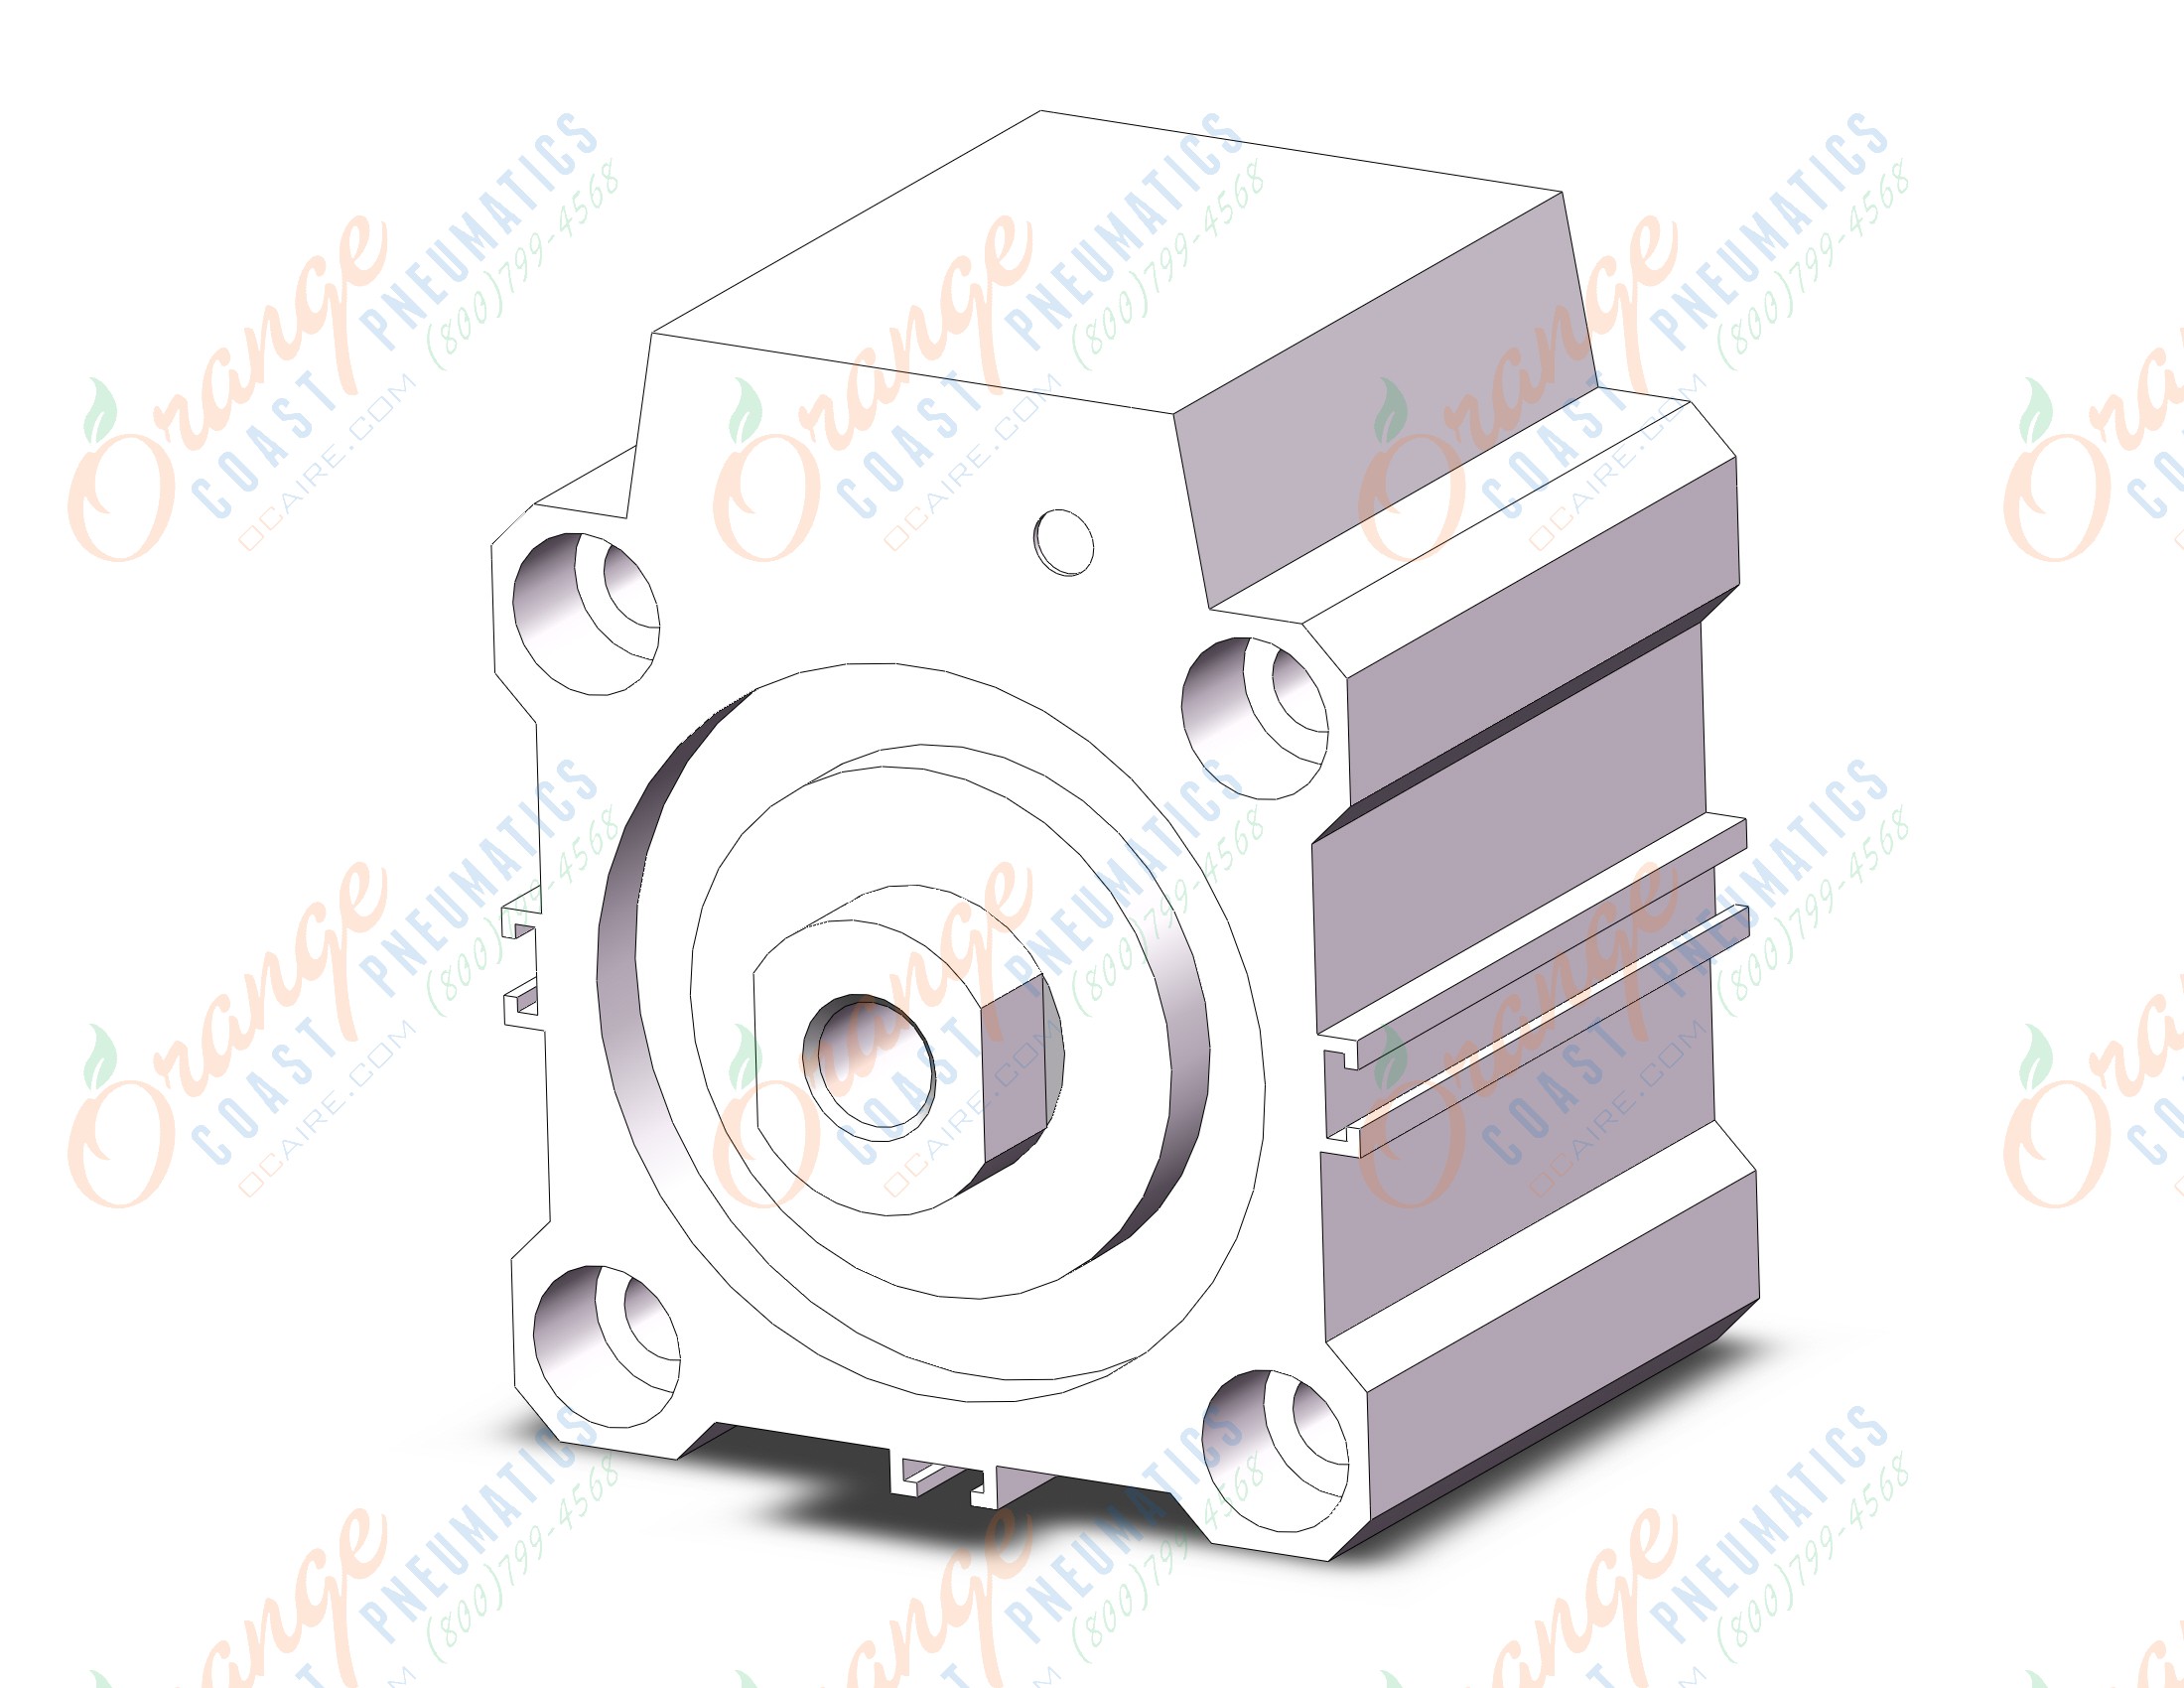 SMC CDQP2B50-10D compact cylinder, cq2, COMPACT CYLINDER